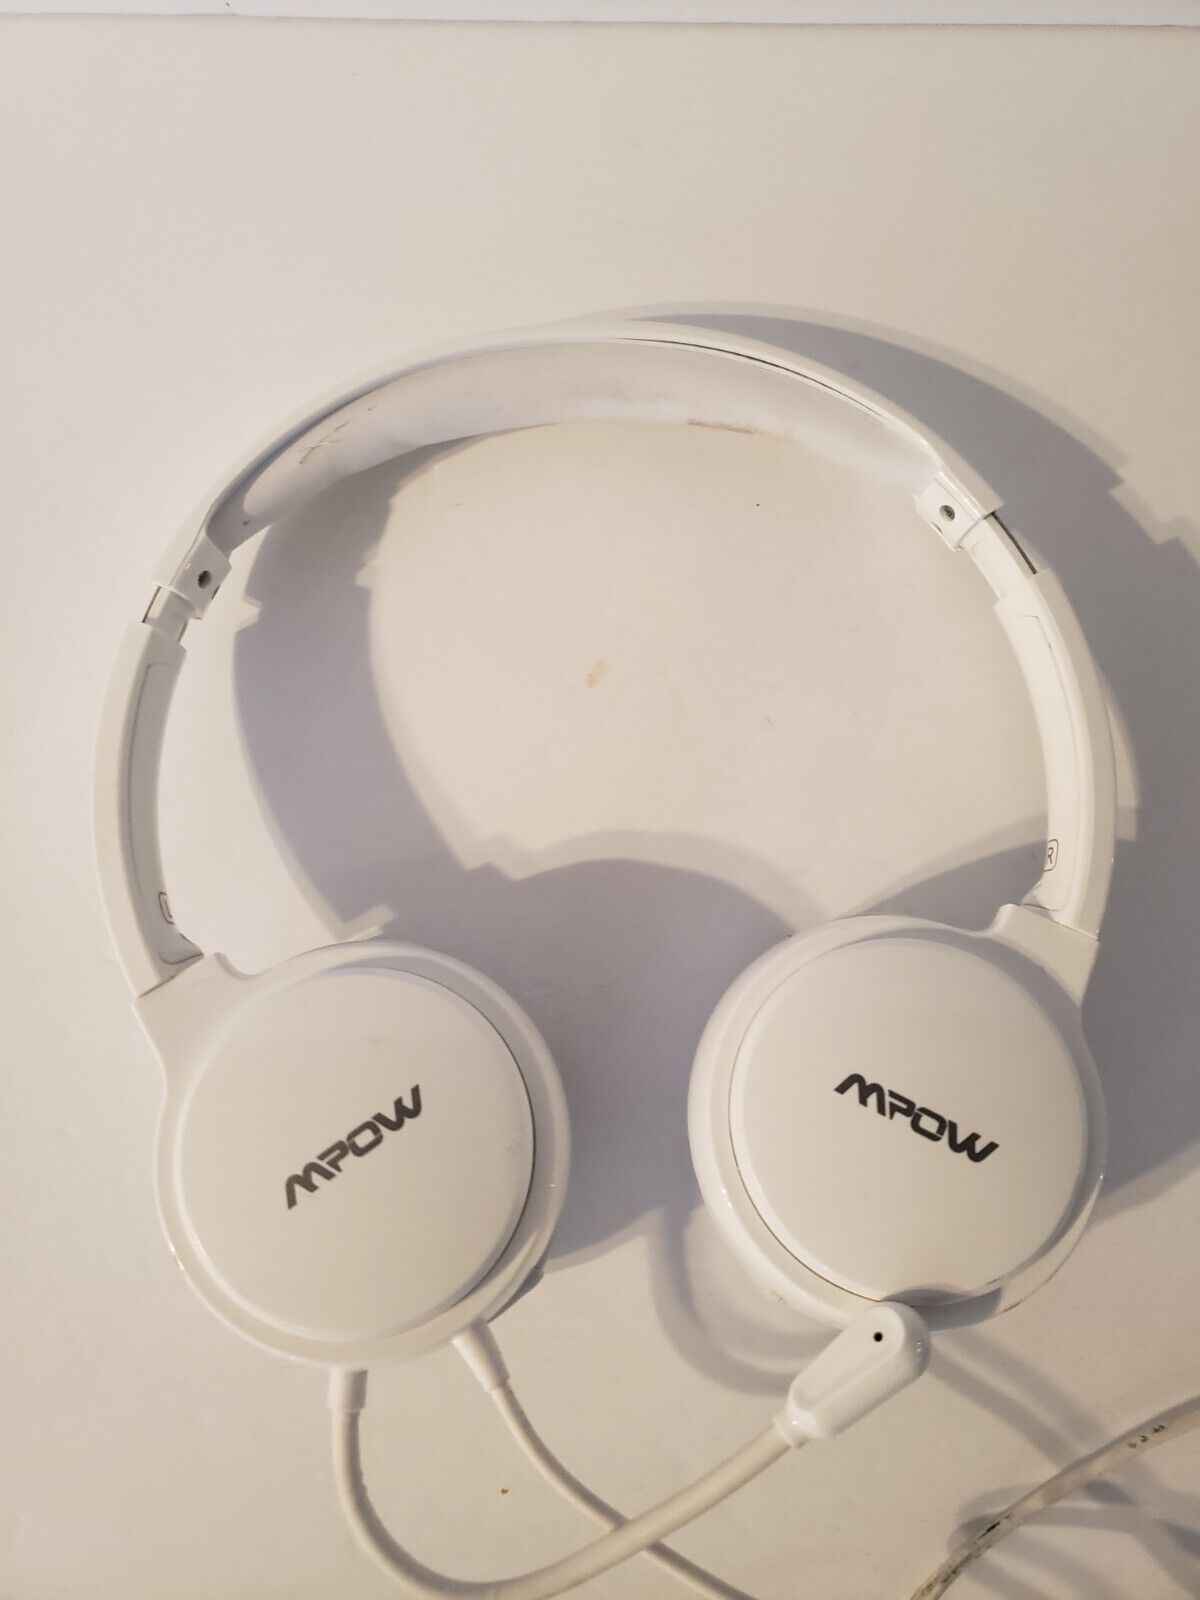 MPOW 071 AUX Headset, White, With Microphone